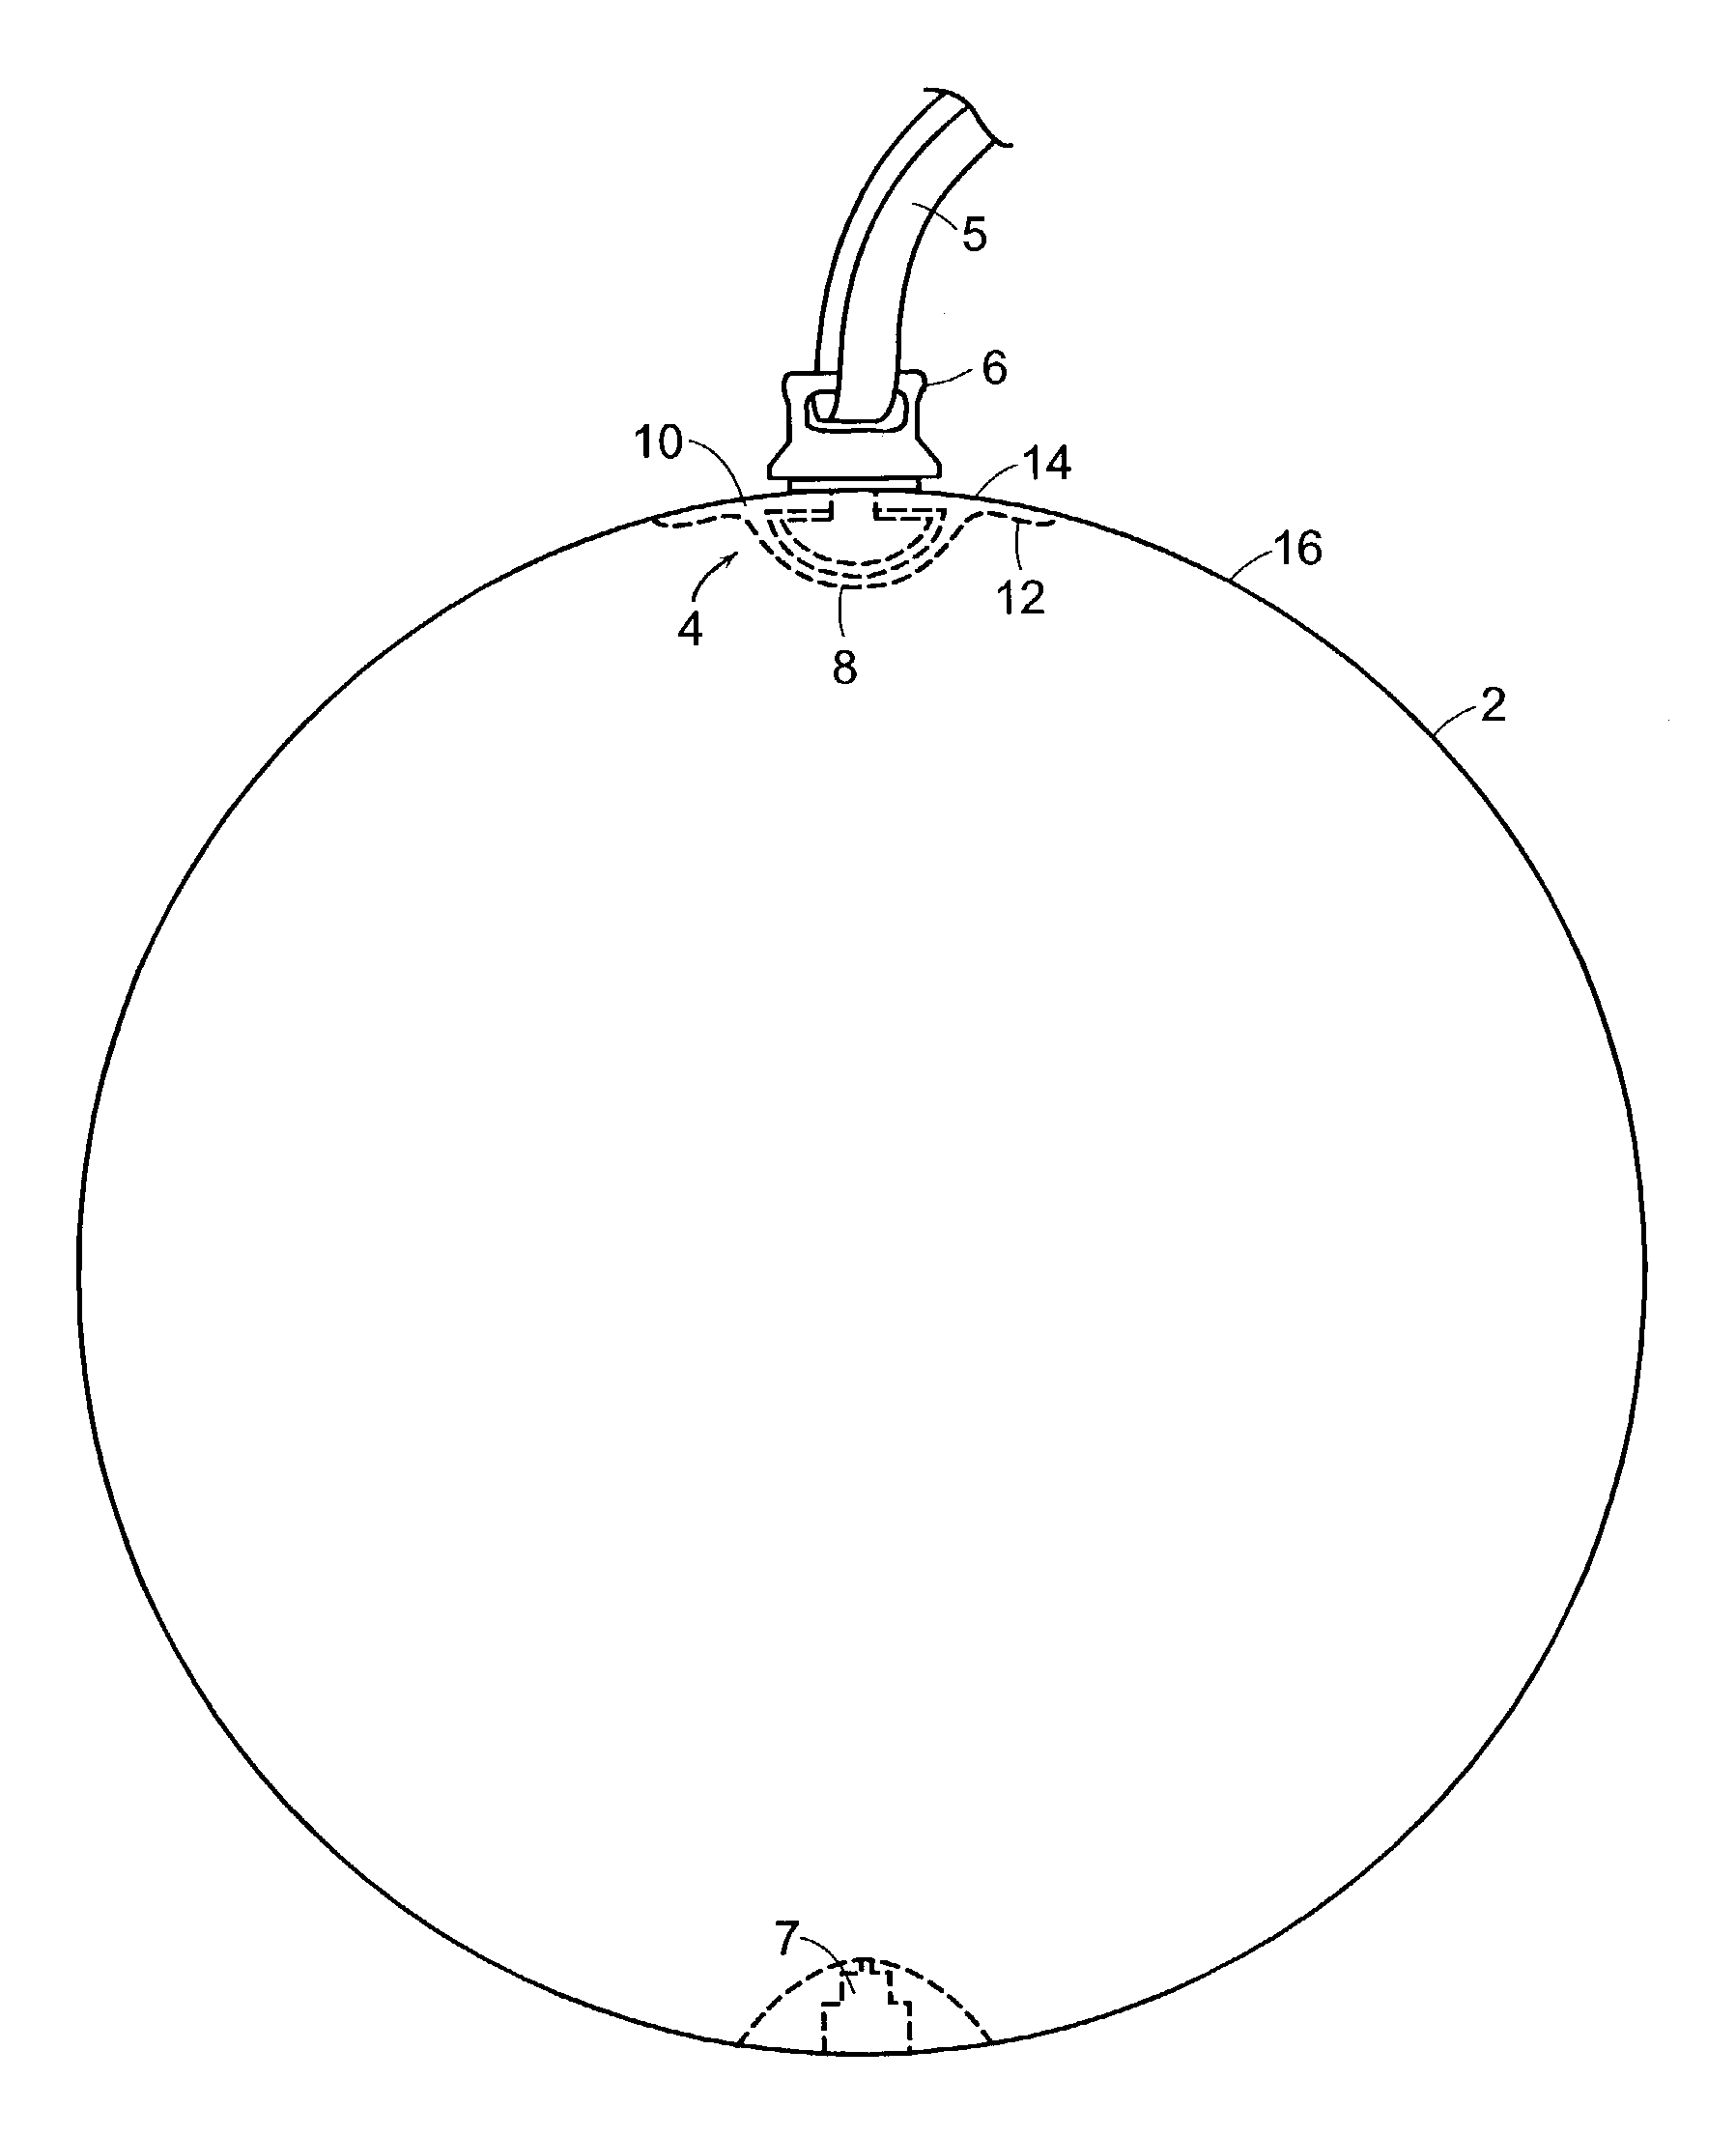 Ball with receptacle to receive a key